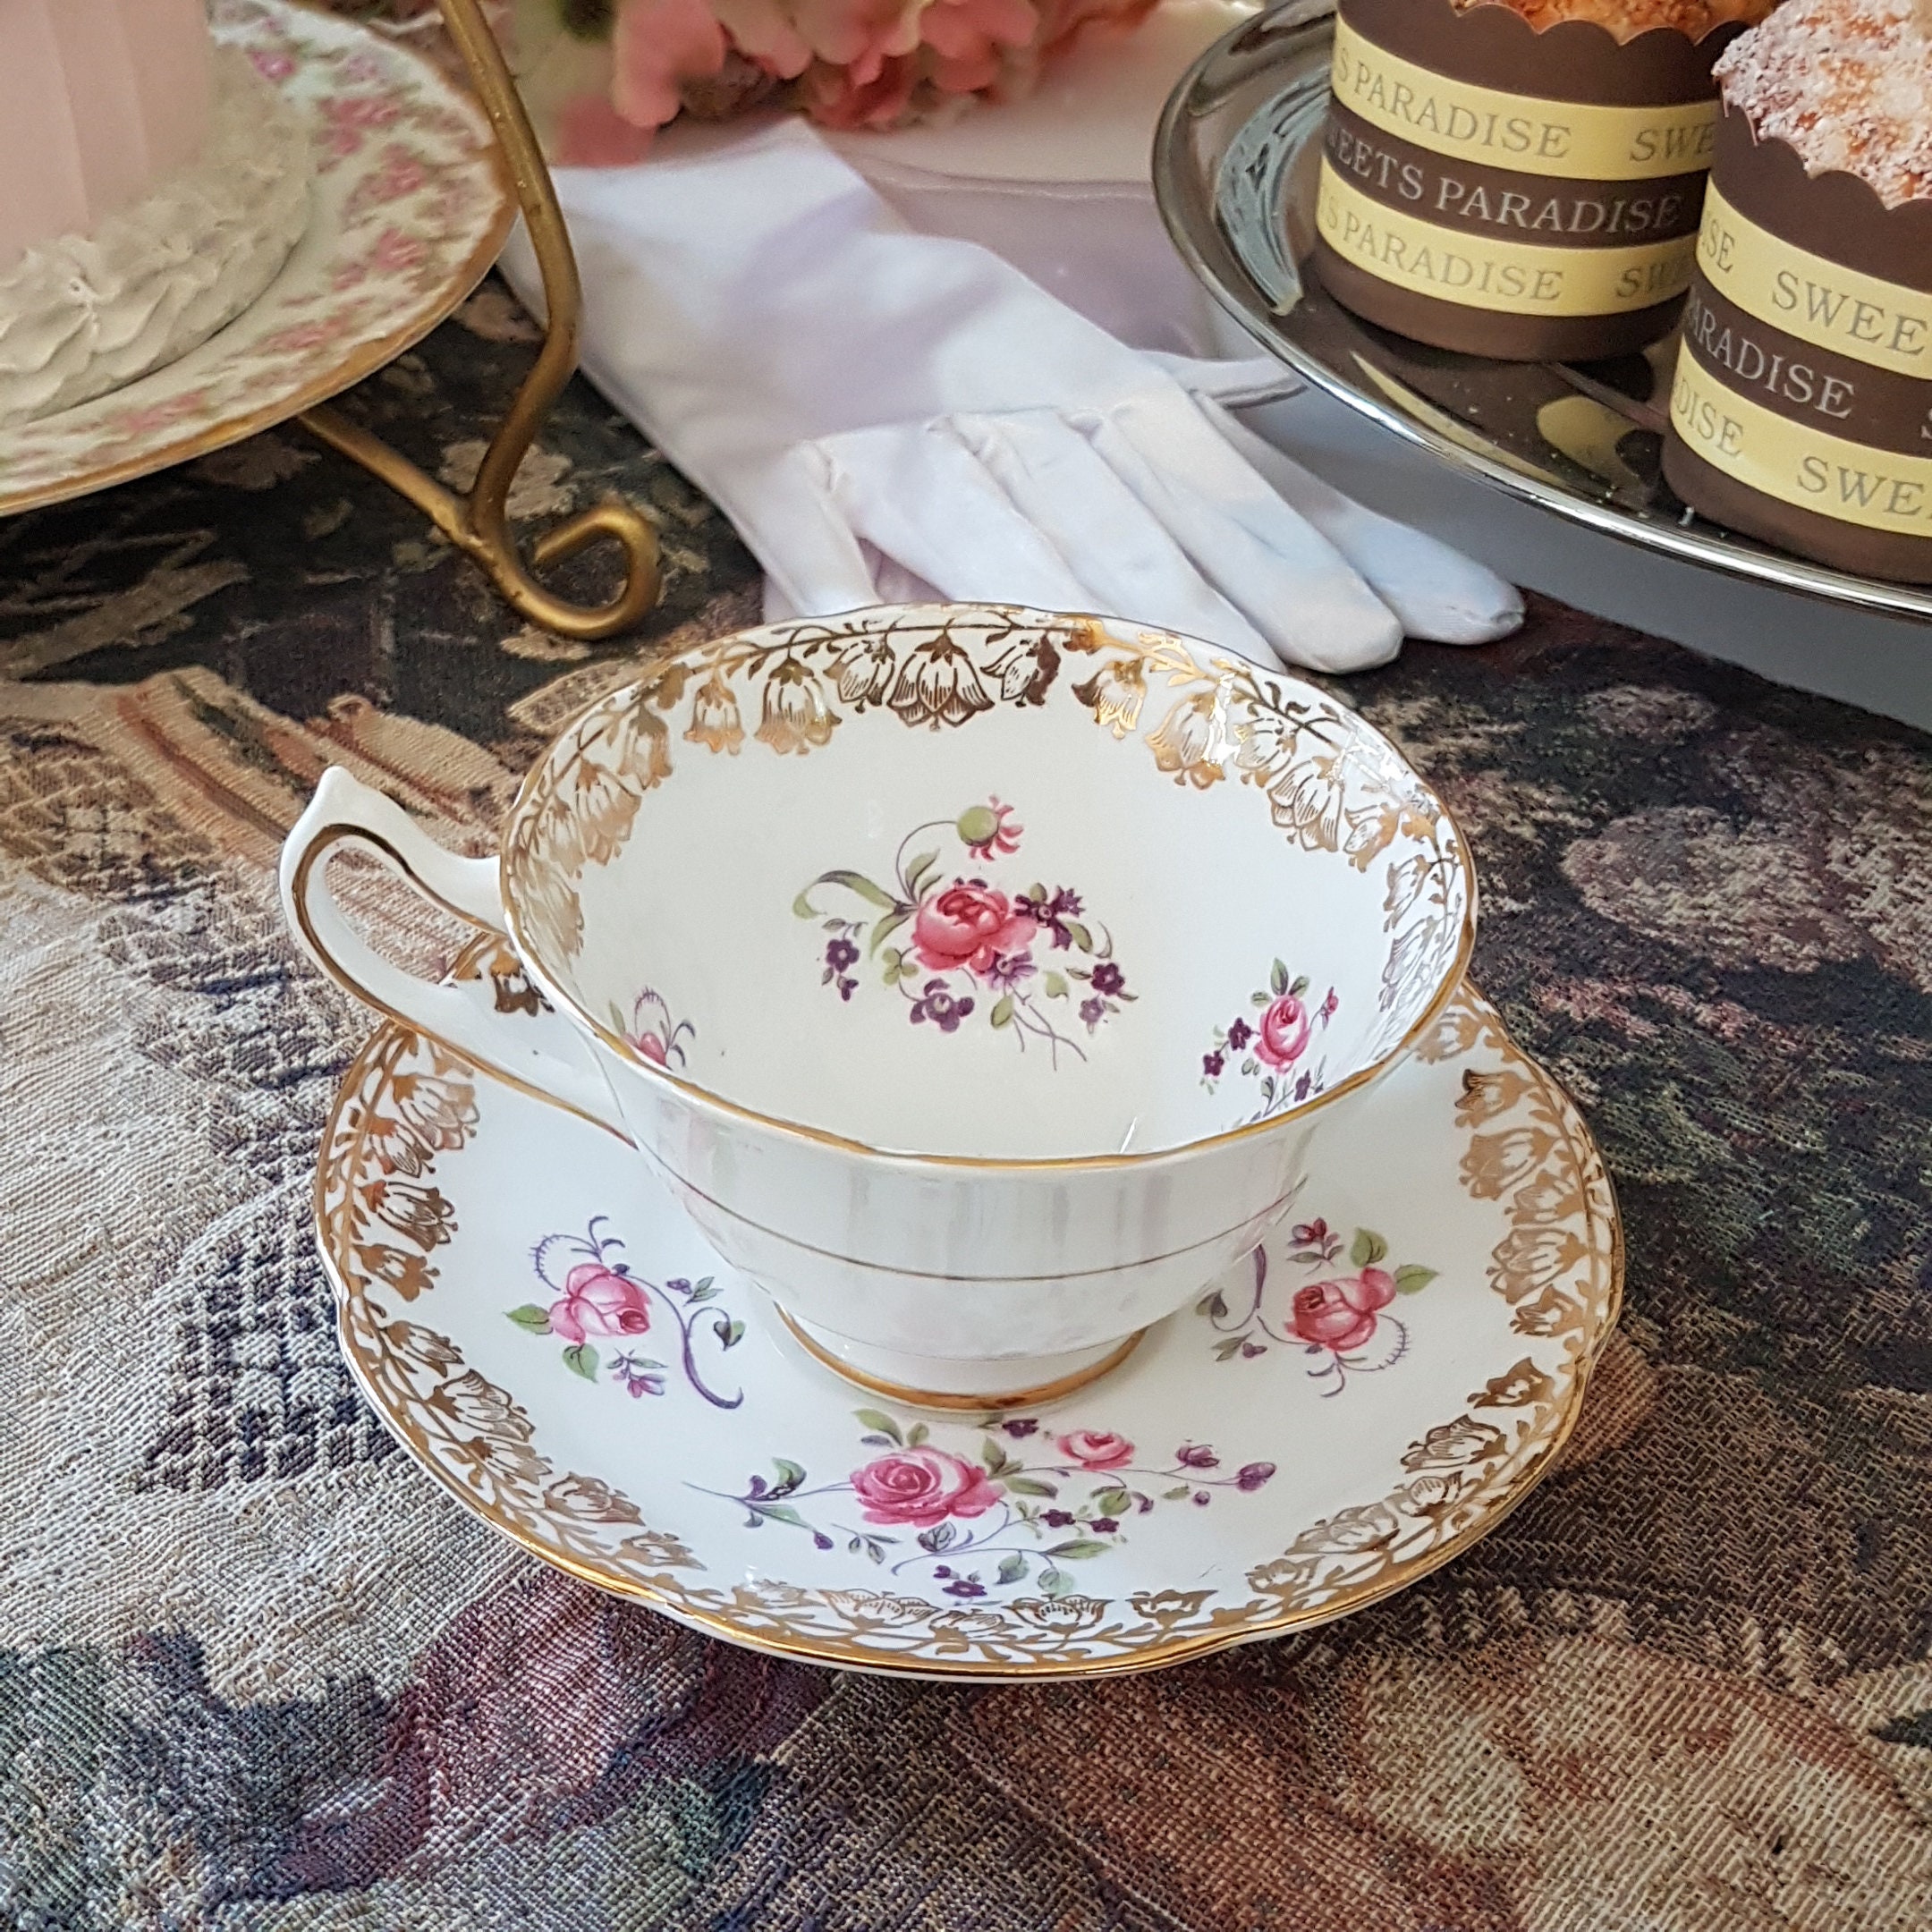 Vintage Imperial English China Trio Tea Cup Saucer Plate Pink Rose 22K gold gild 